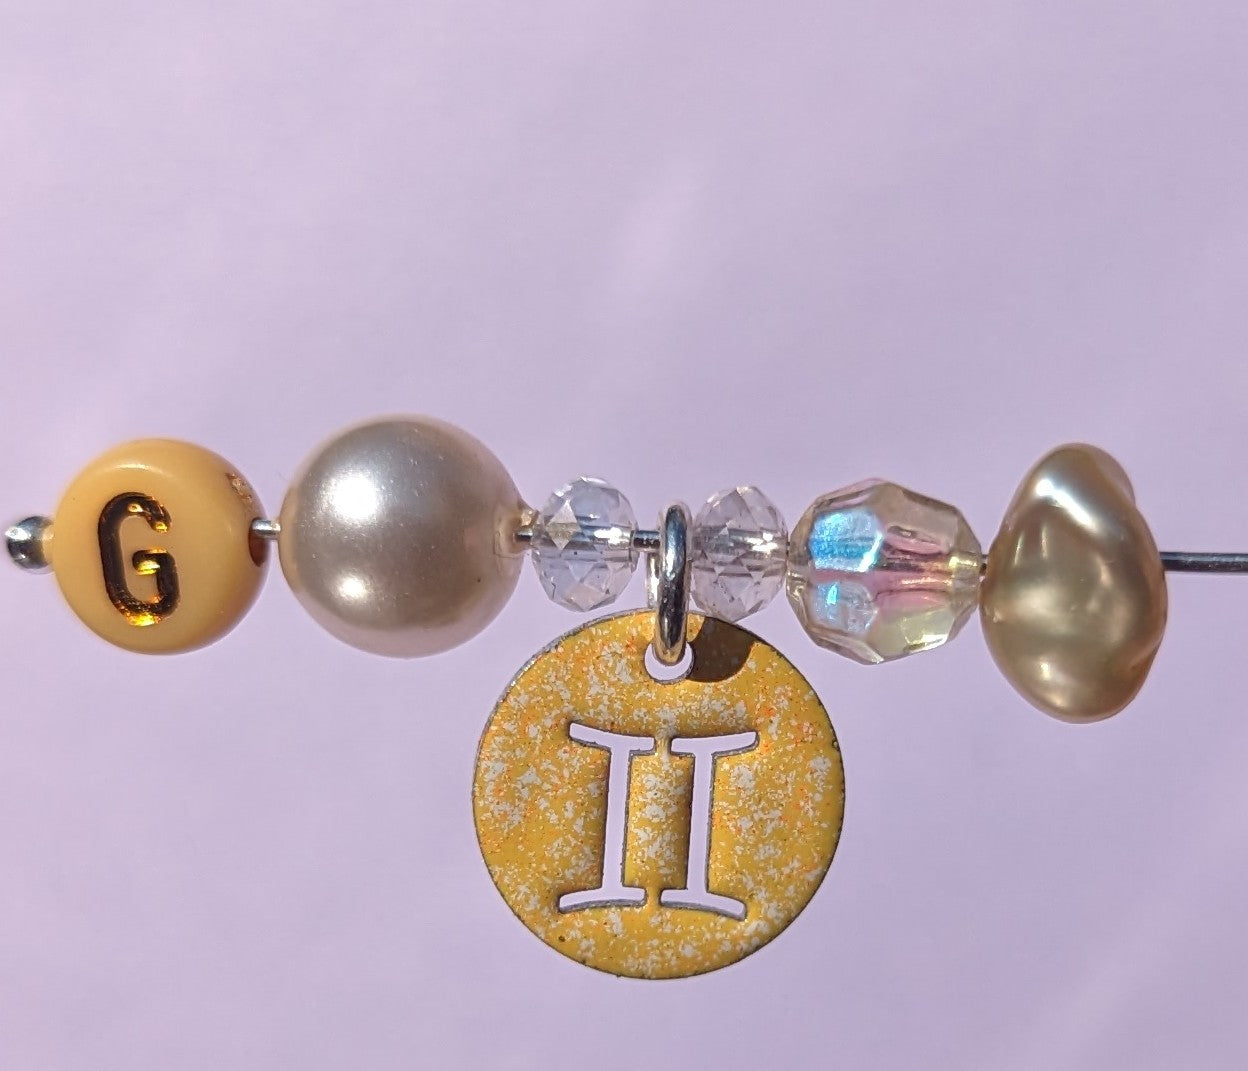 Gemini star sign personalised necklace with freshwater pearl and crystal beads. 